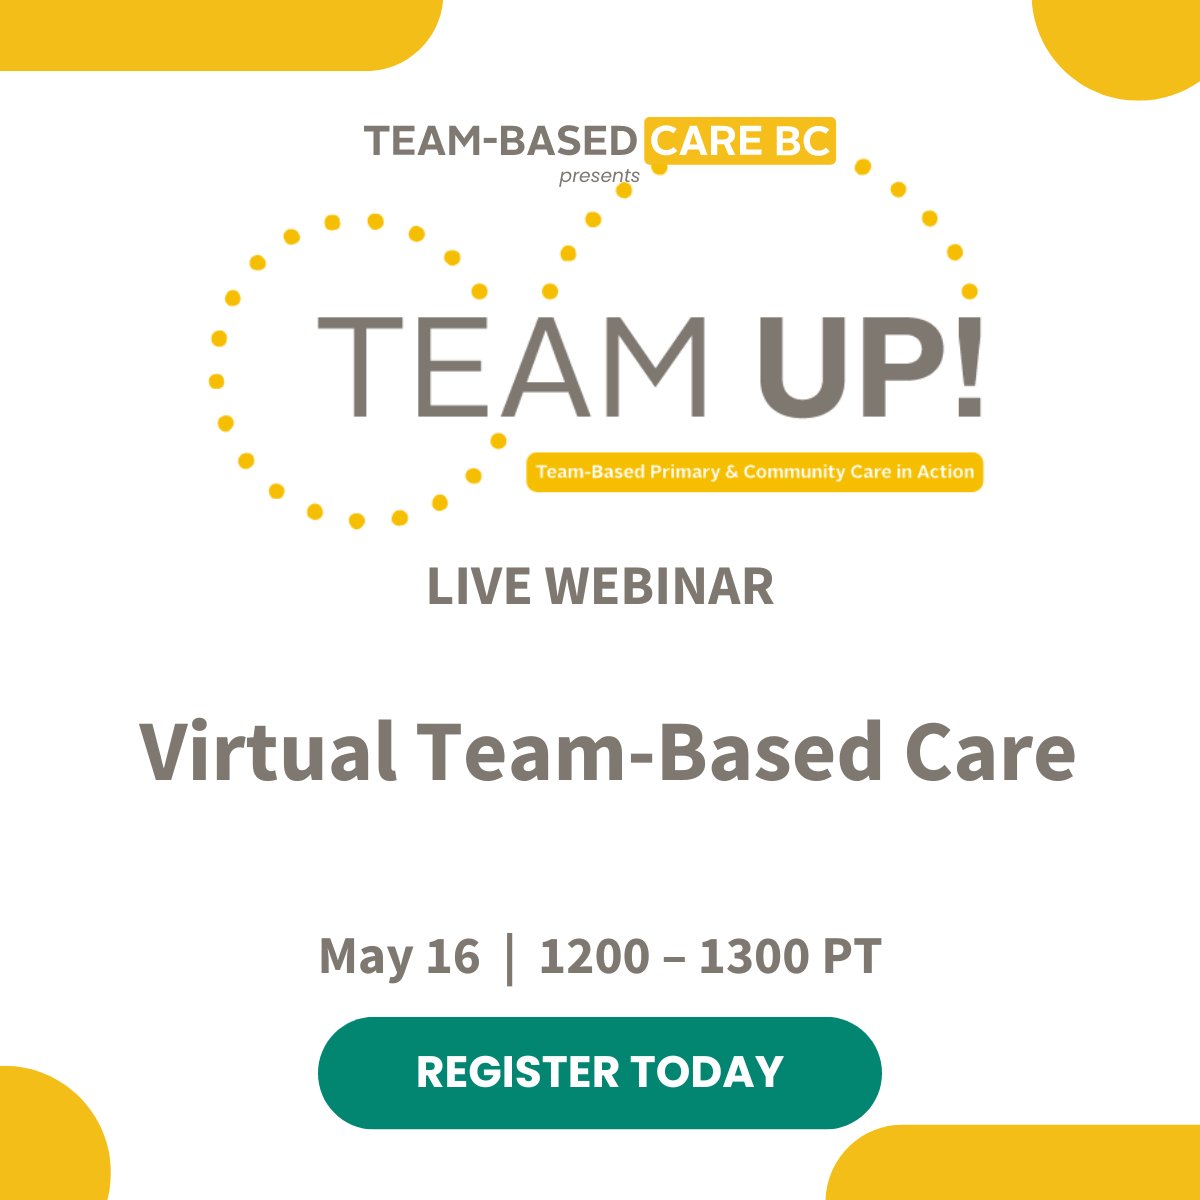 Join us this Thursday, May 16, for a Team Up! Webinar! We will look at key themes identified through focus group interviews and explore how you can apply these learnings to optimize virtual team-based care services in your own settings. teambasedcarebc.ca/events/team-up…